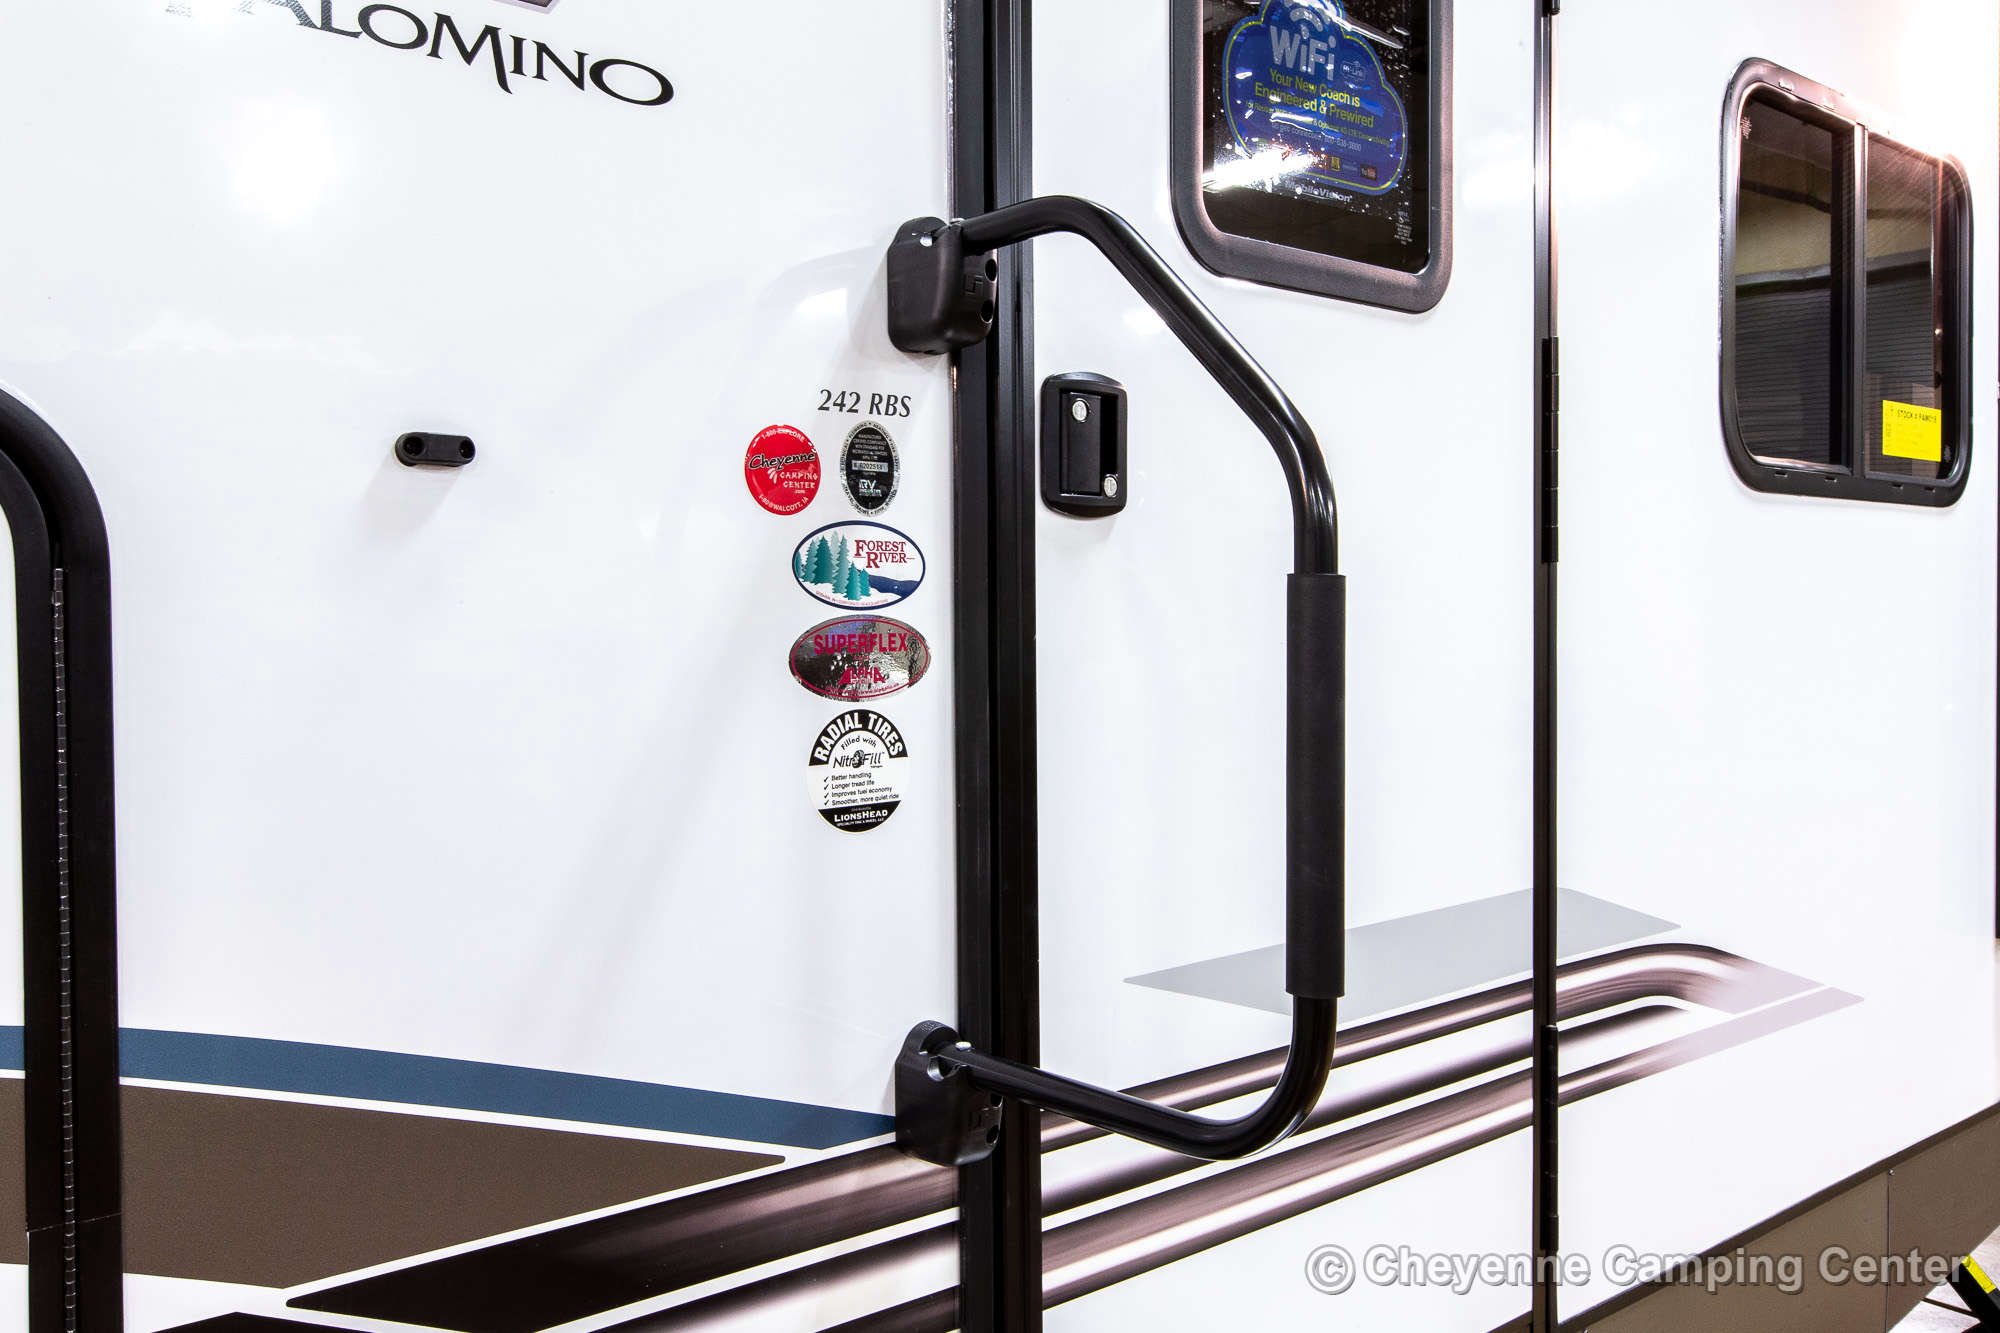 2022 Palomino SolAire Ultra Lite 242RBS Travel Trailer Exterior Image